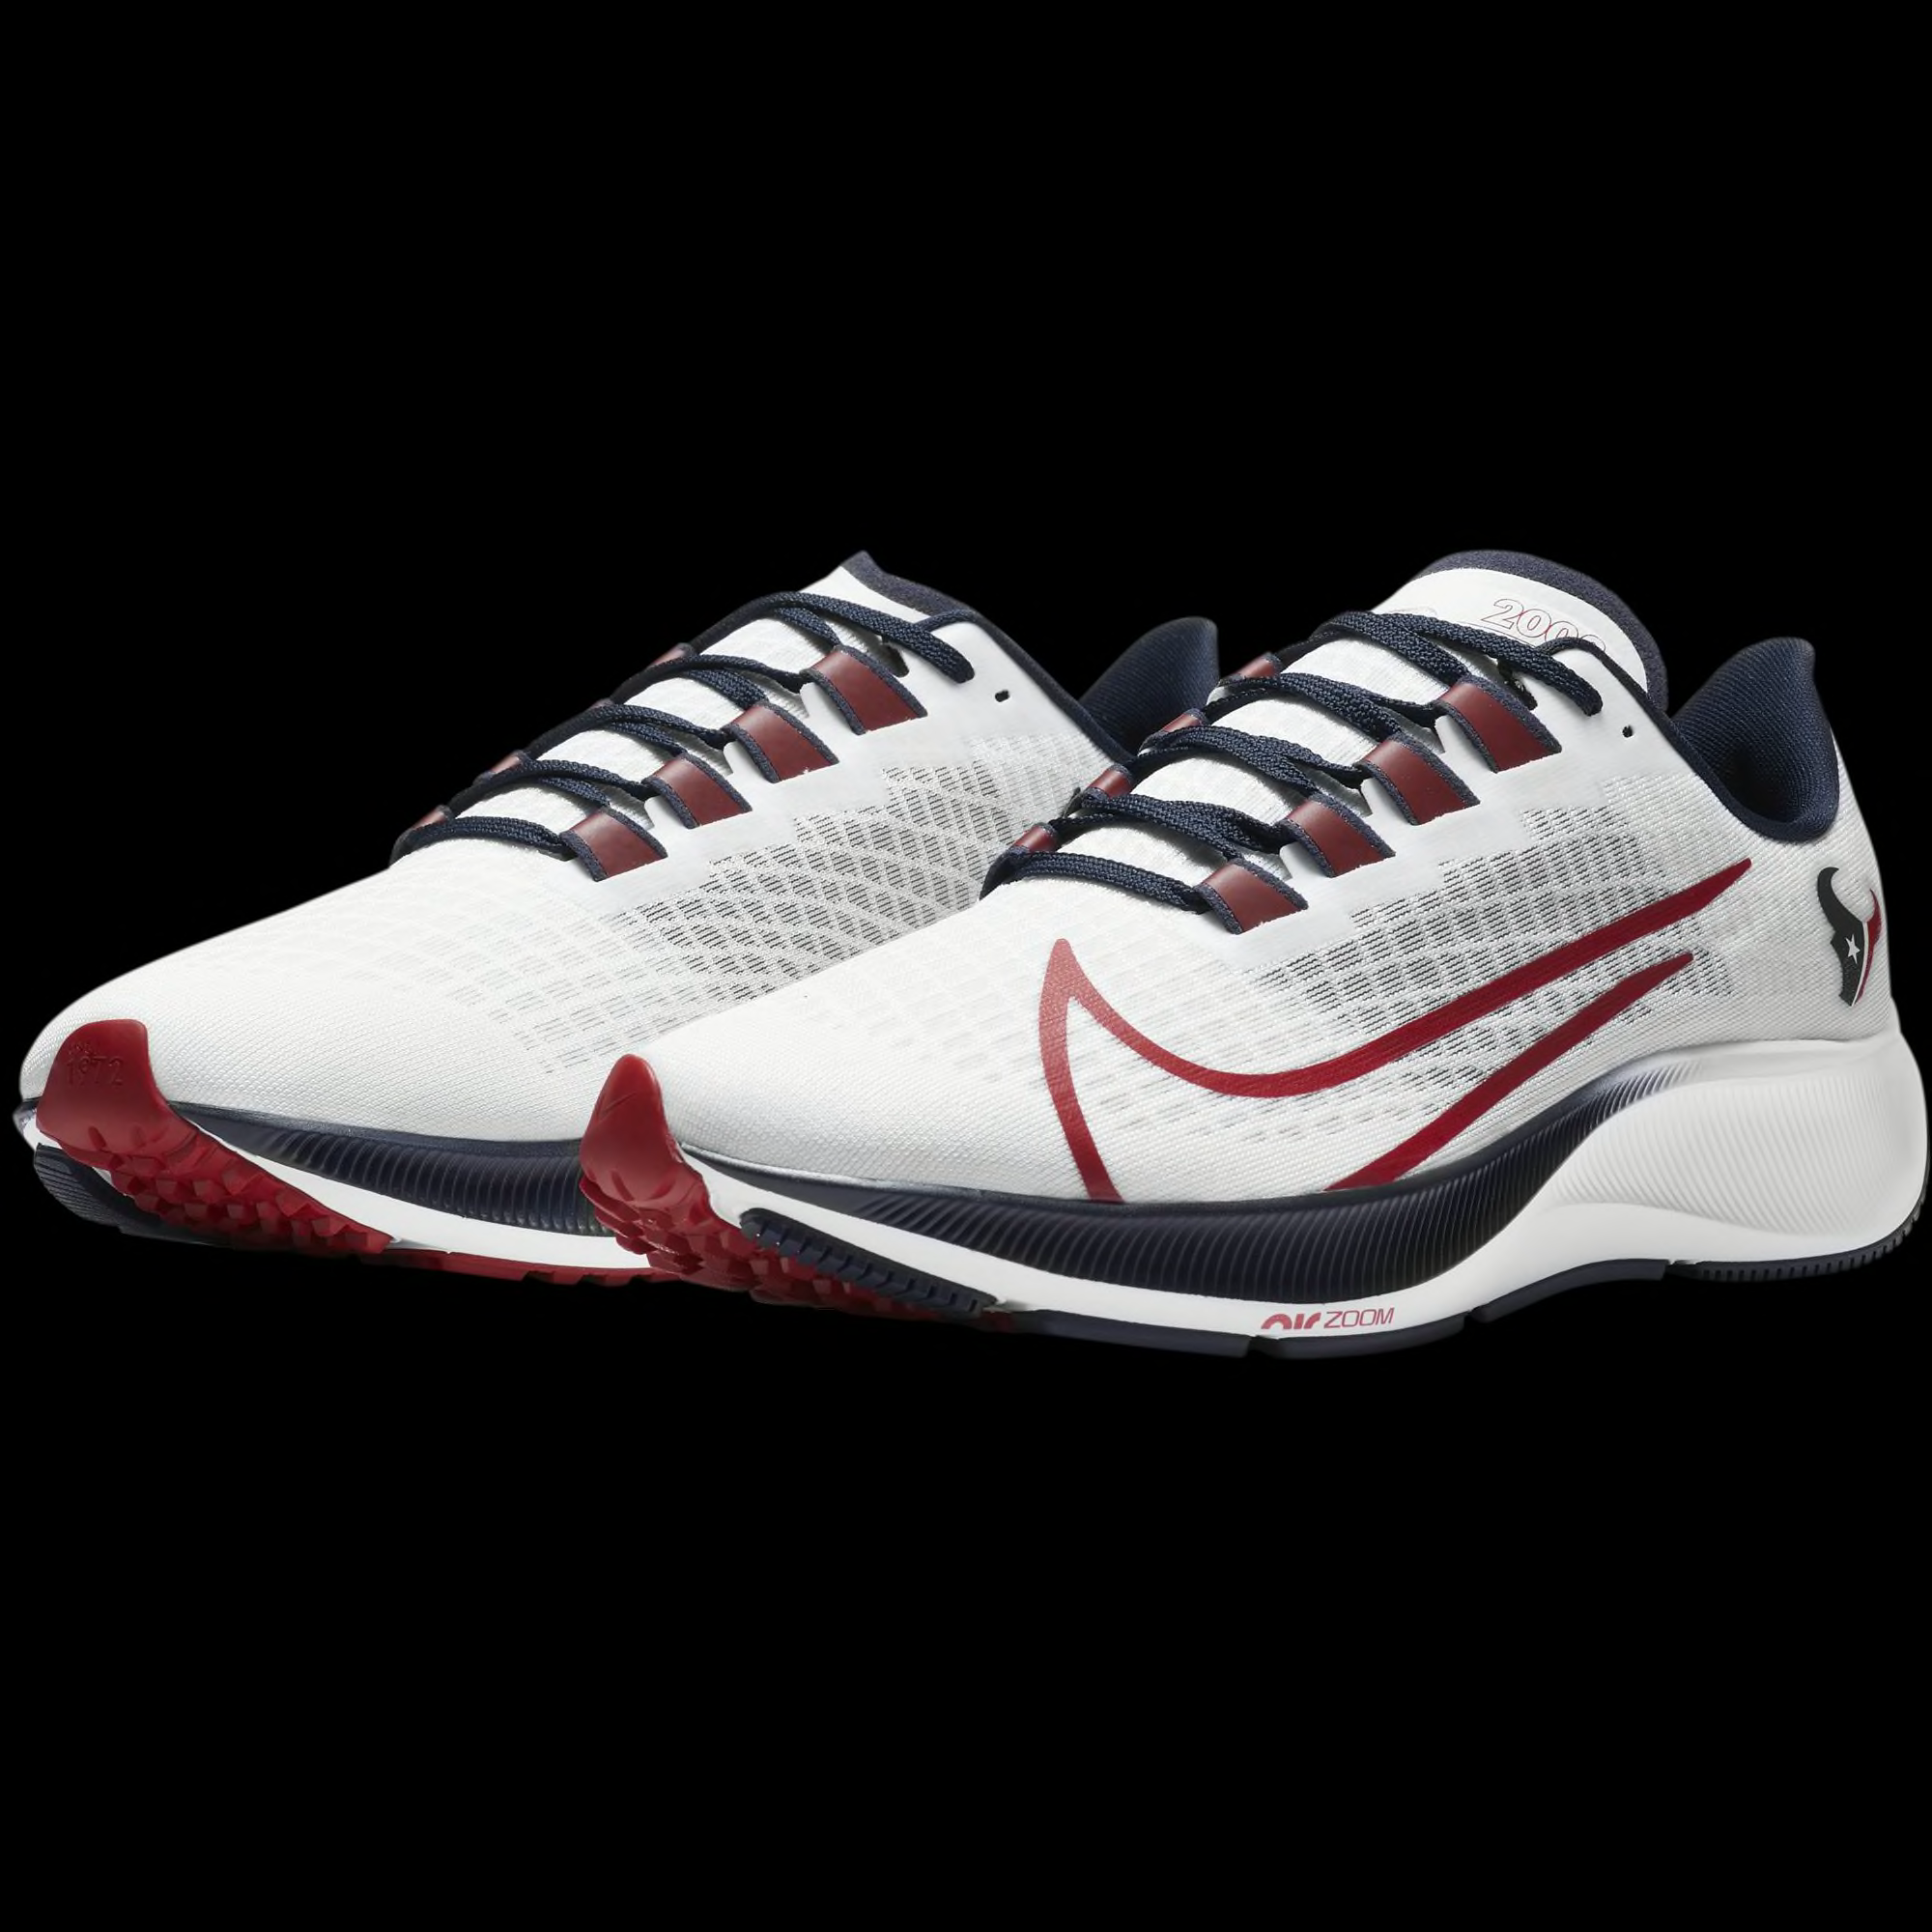 These new Houston Texans Nike shoes are 